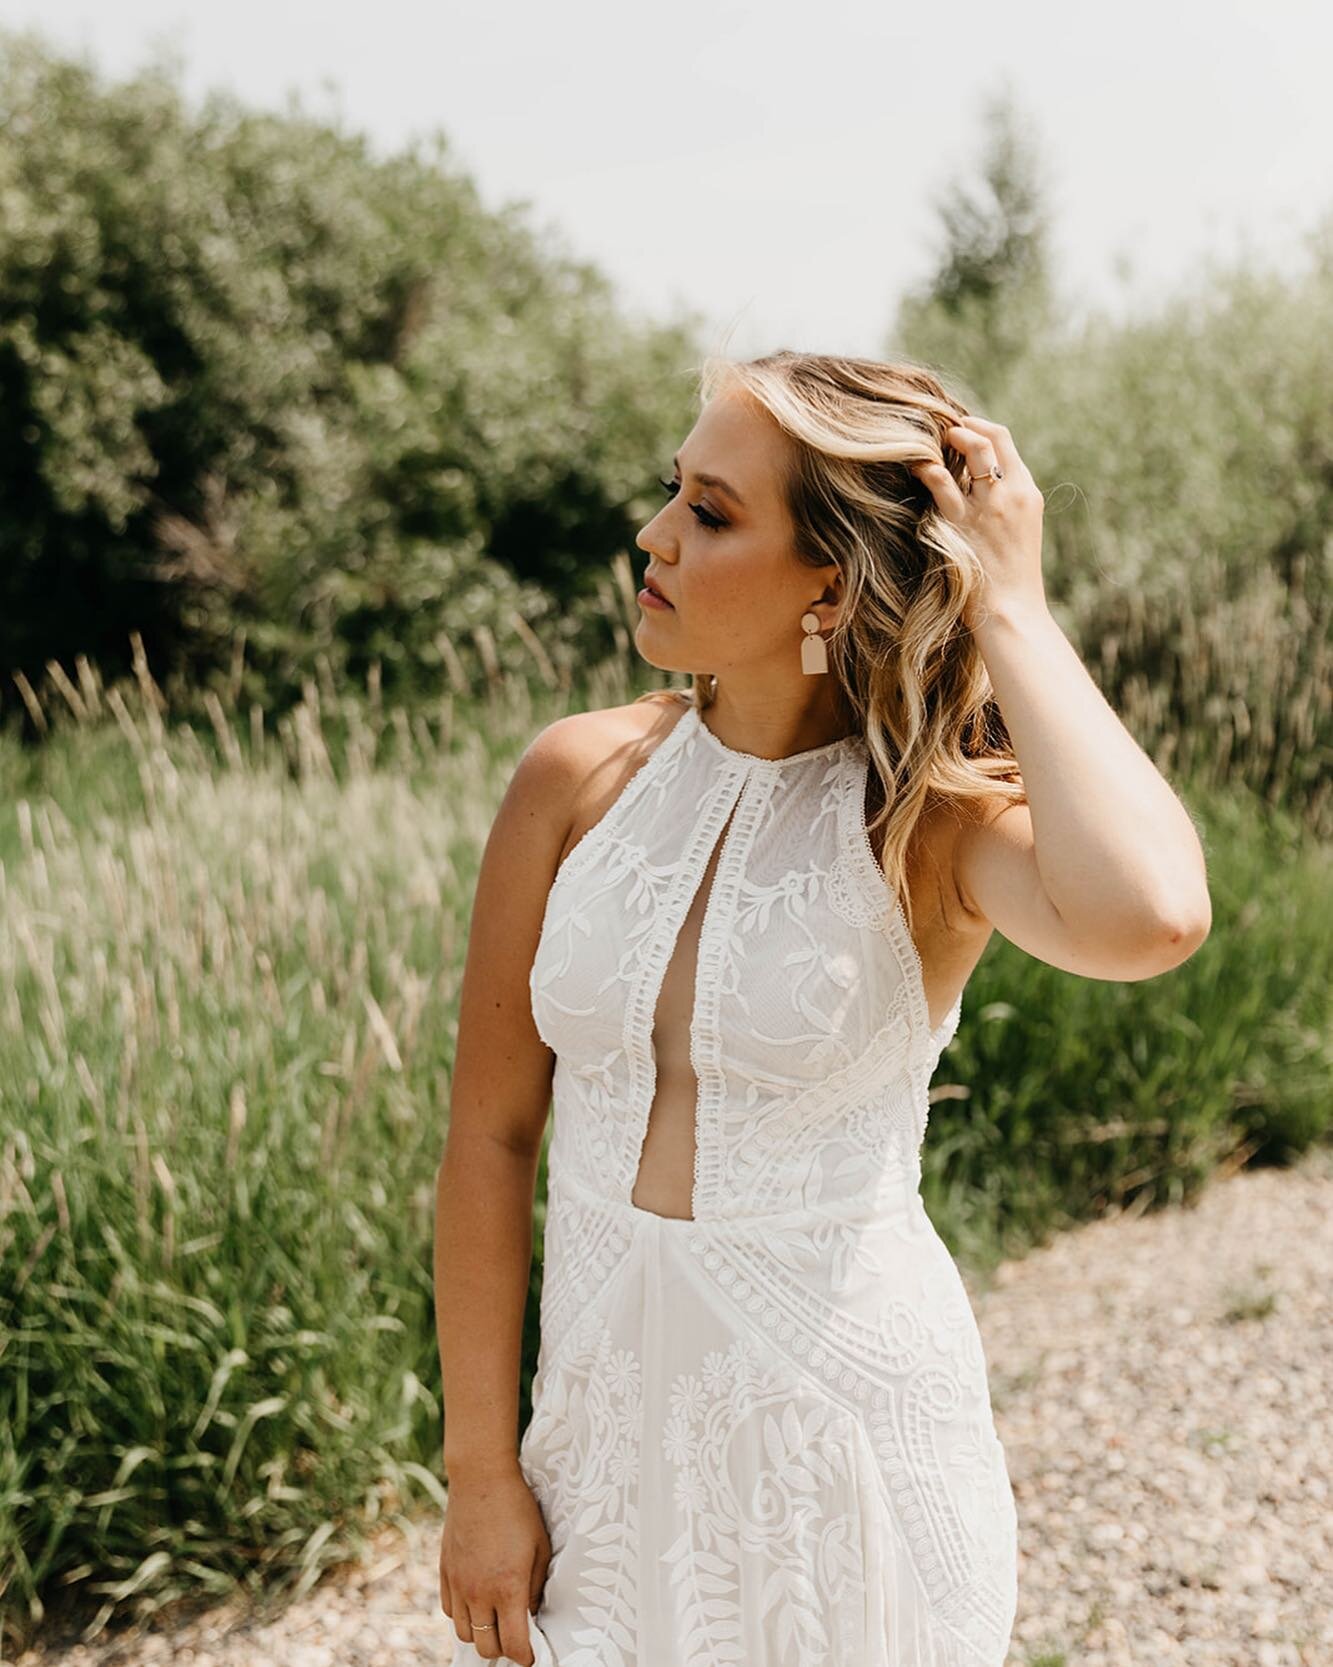 What a stunner! So honored to be a part of this perfect day. Love you @harpermicaela ❤️

Photo: @kraefilms 
Makeup: @carolinelalivebeauty 

#bride #bridalmakeup #makeup #makeupartist #coloradomakeupartist #mua #steamboatmakeupartistry #rockymountainb